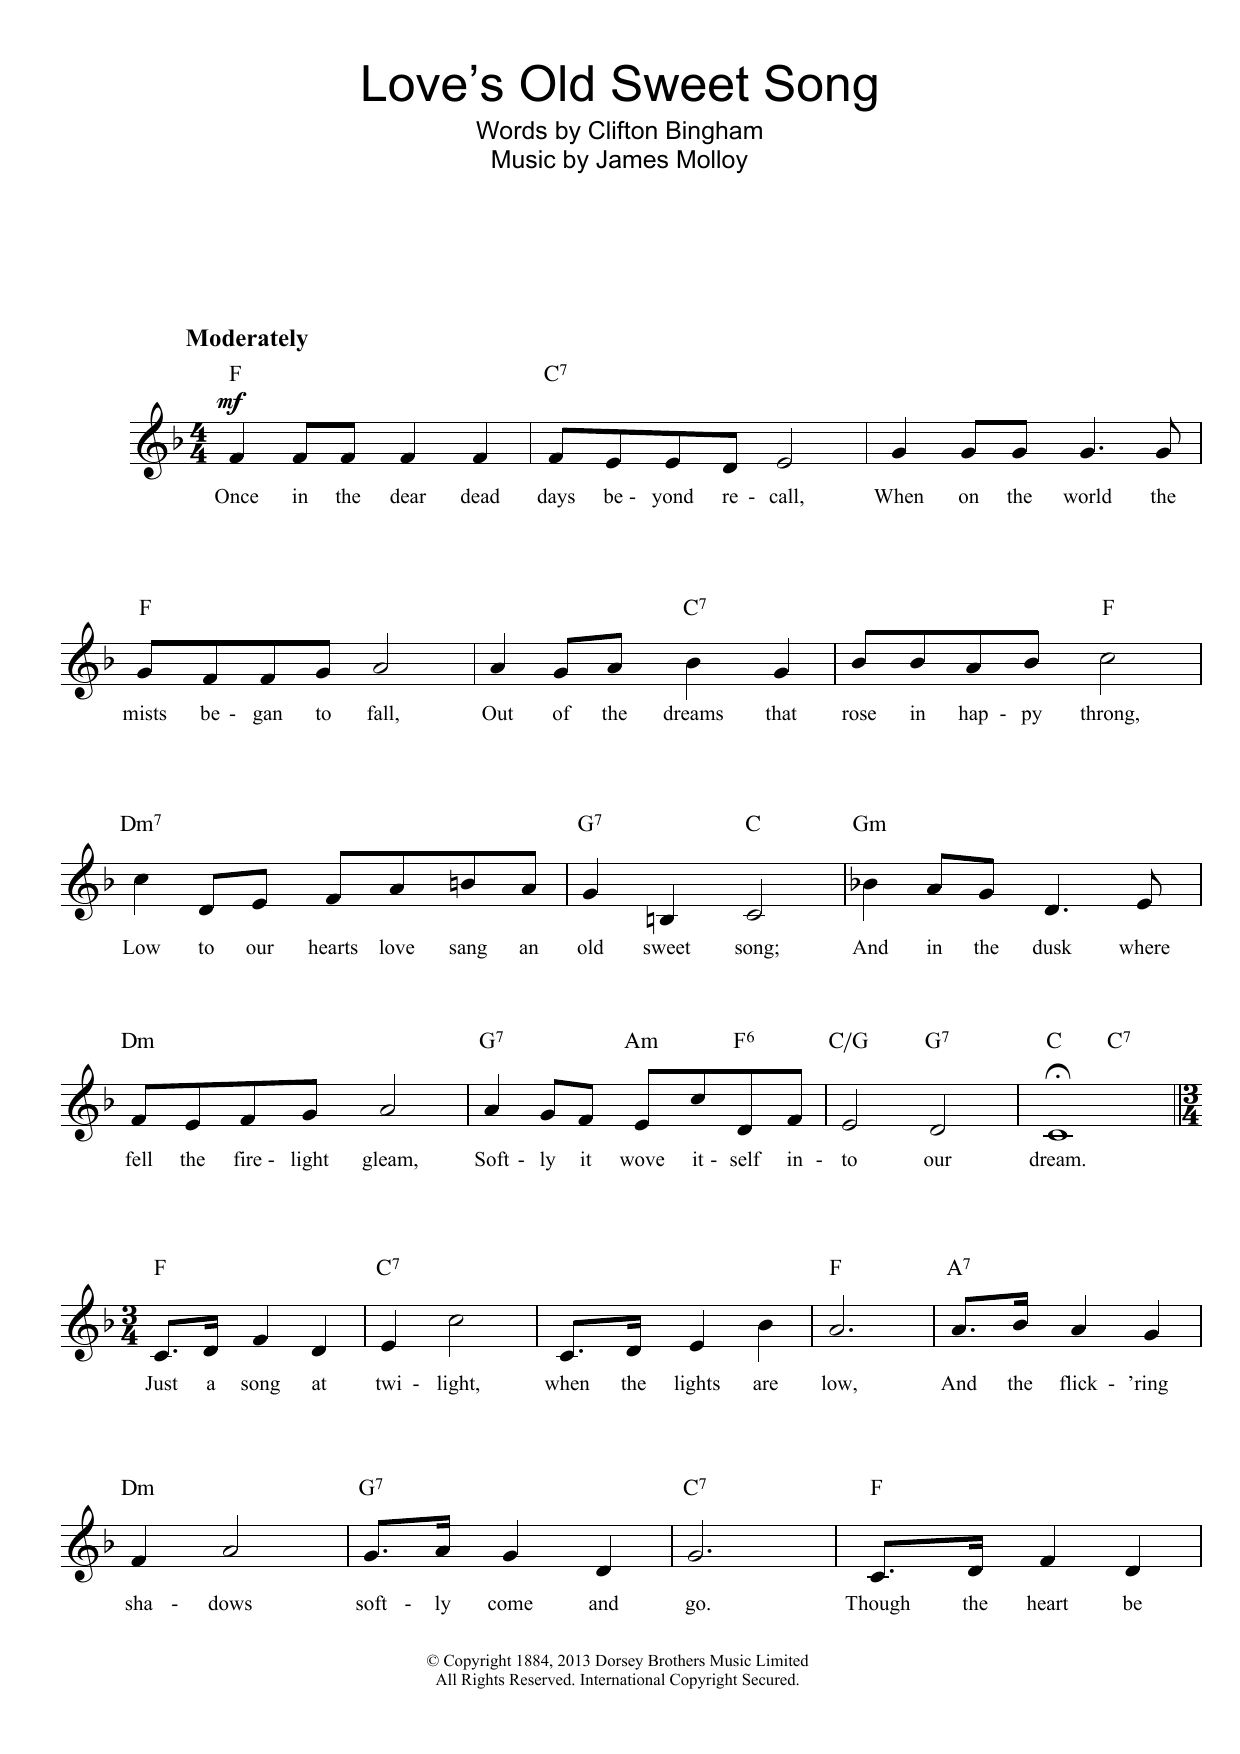 James L. Molloy Love's Old Sweet Song sheet music notes printable PDF score